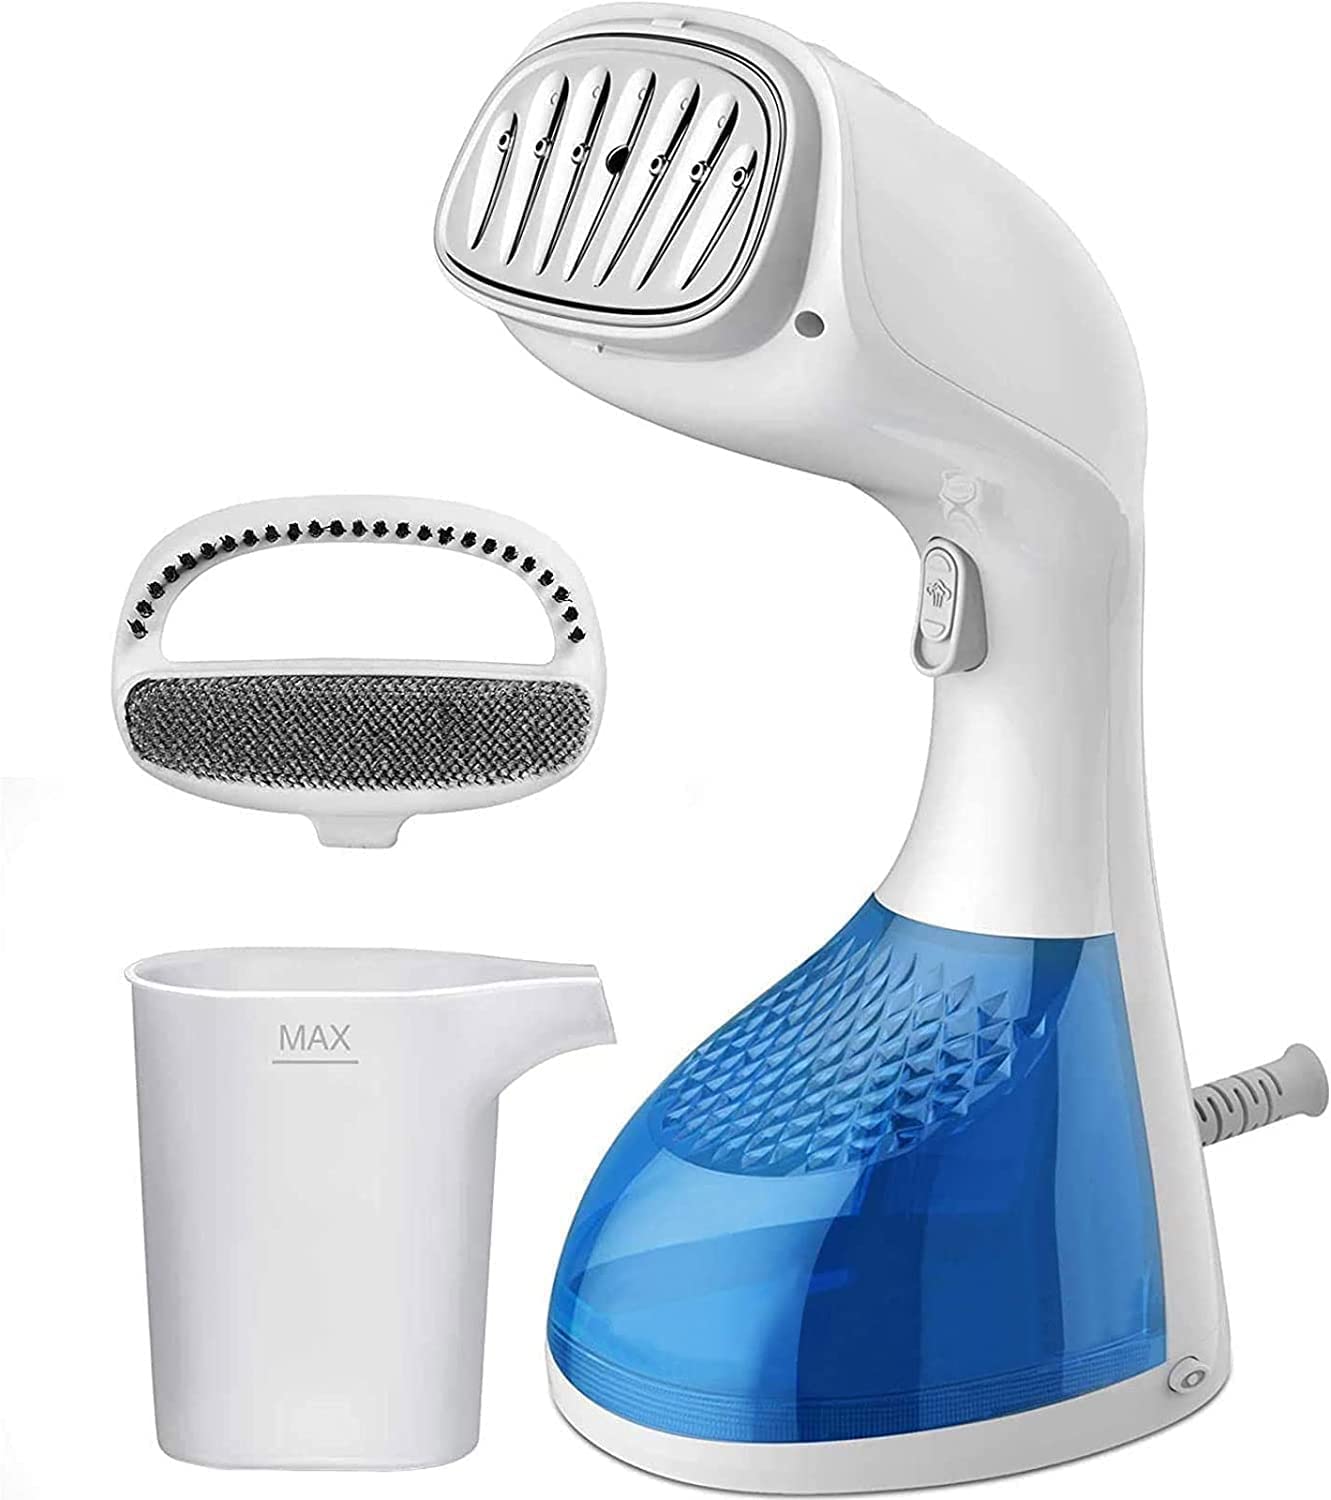 Clothes Steamer - Fast Heat Up, Portable & Travel-Friendly UK